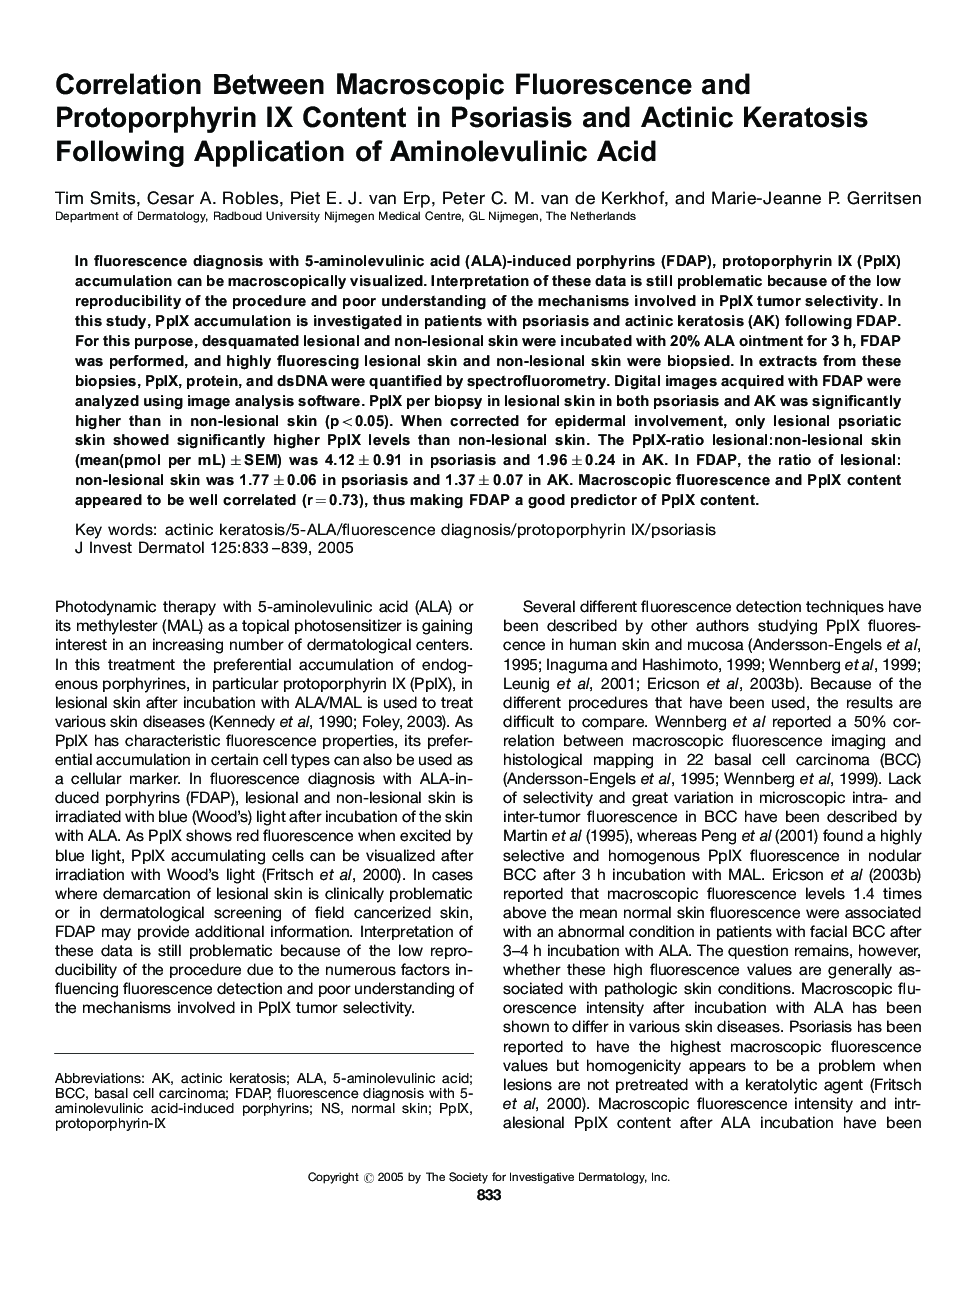 Correlation Between Macroscopic Fluorescence and Protoporphyrin IX Content in Psoriasis and Actinic Keratosis Following Application of Aminolevulinic Acid